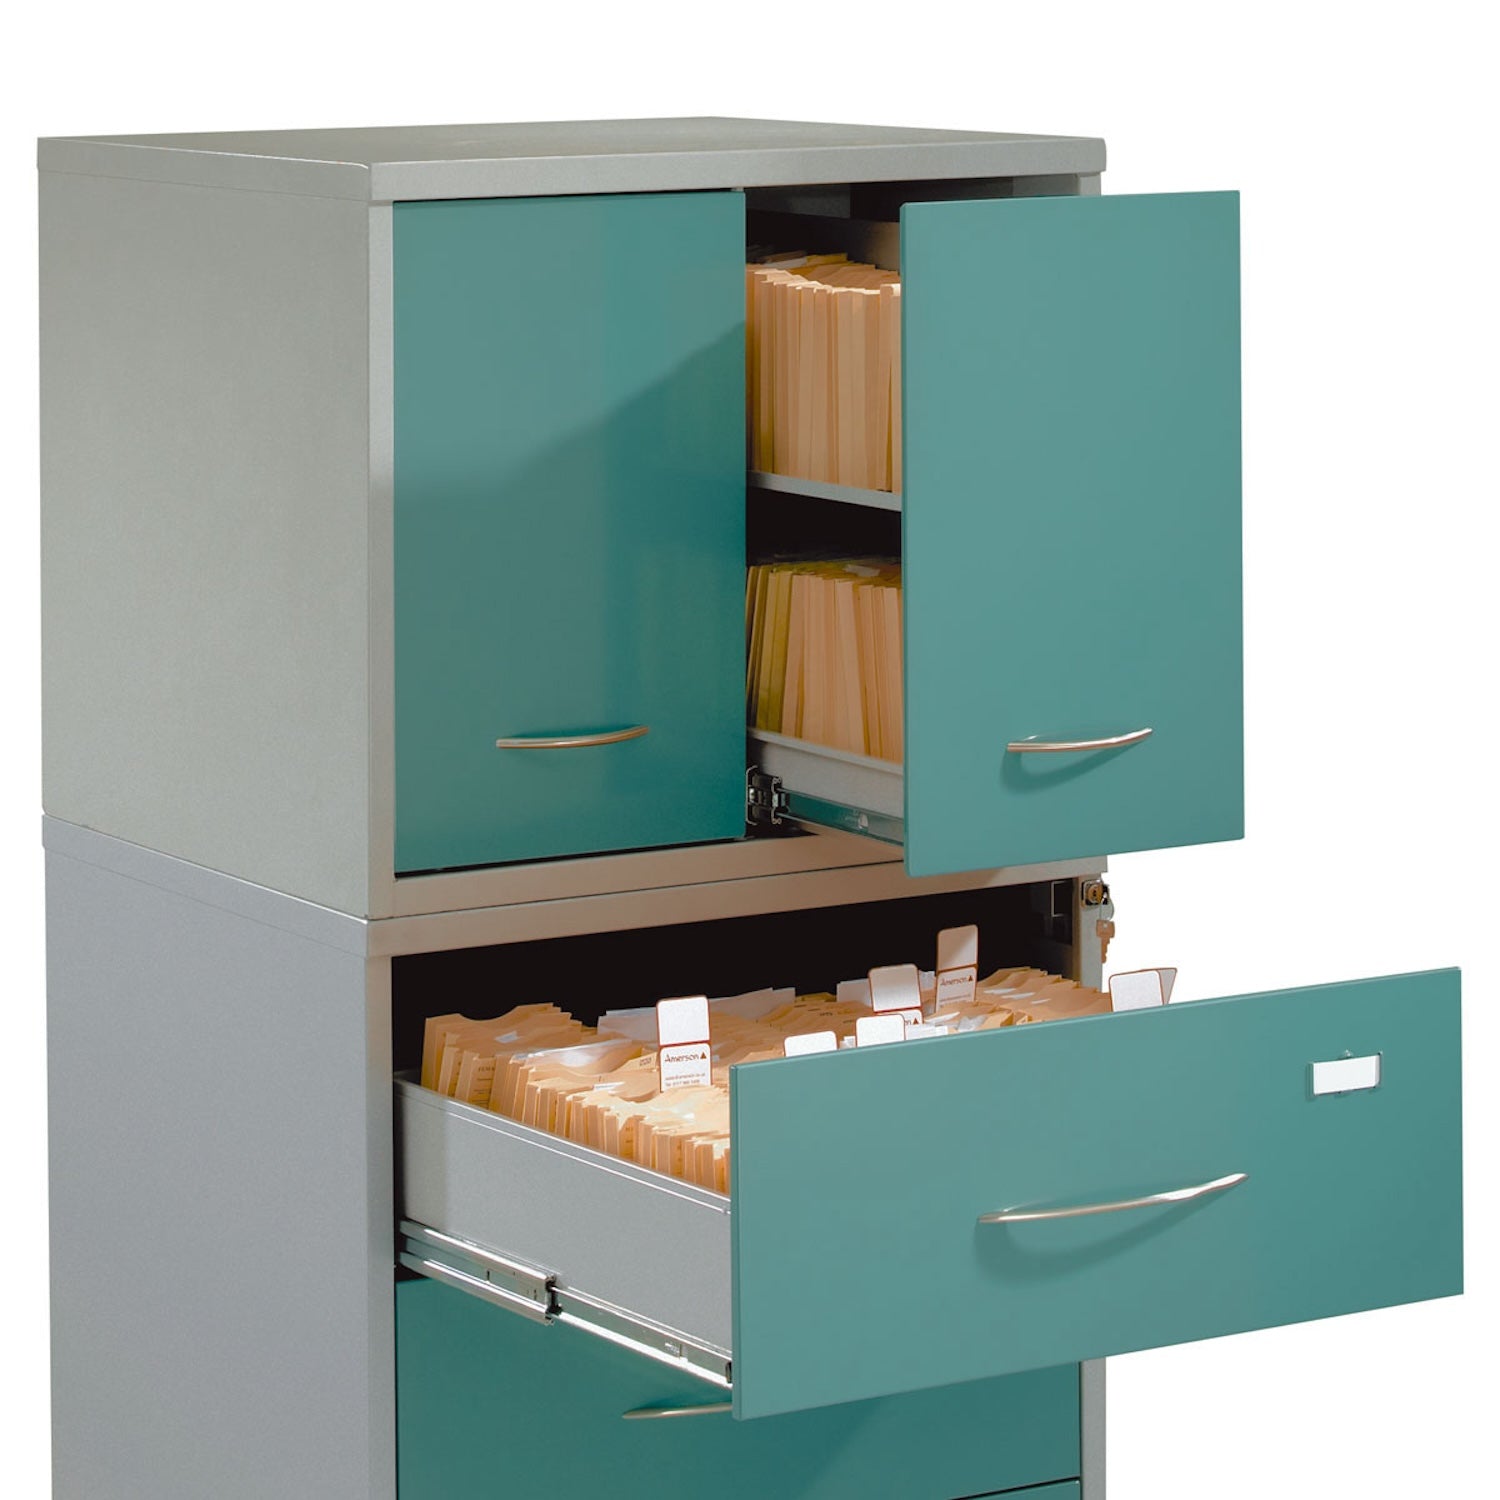 BH Amerson 2 Vertical Drawers Cabinet | Cream Frame & Drawers | Placed Centrally in a Room